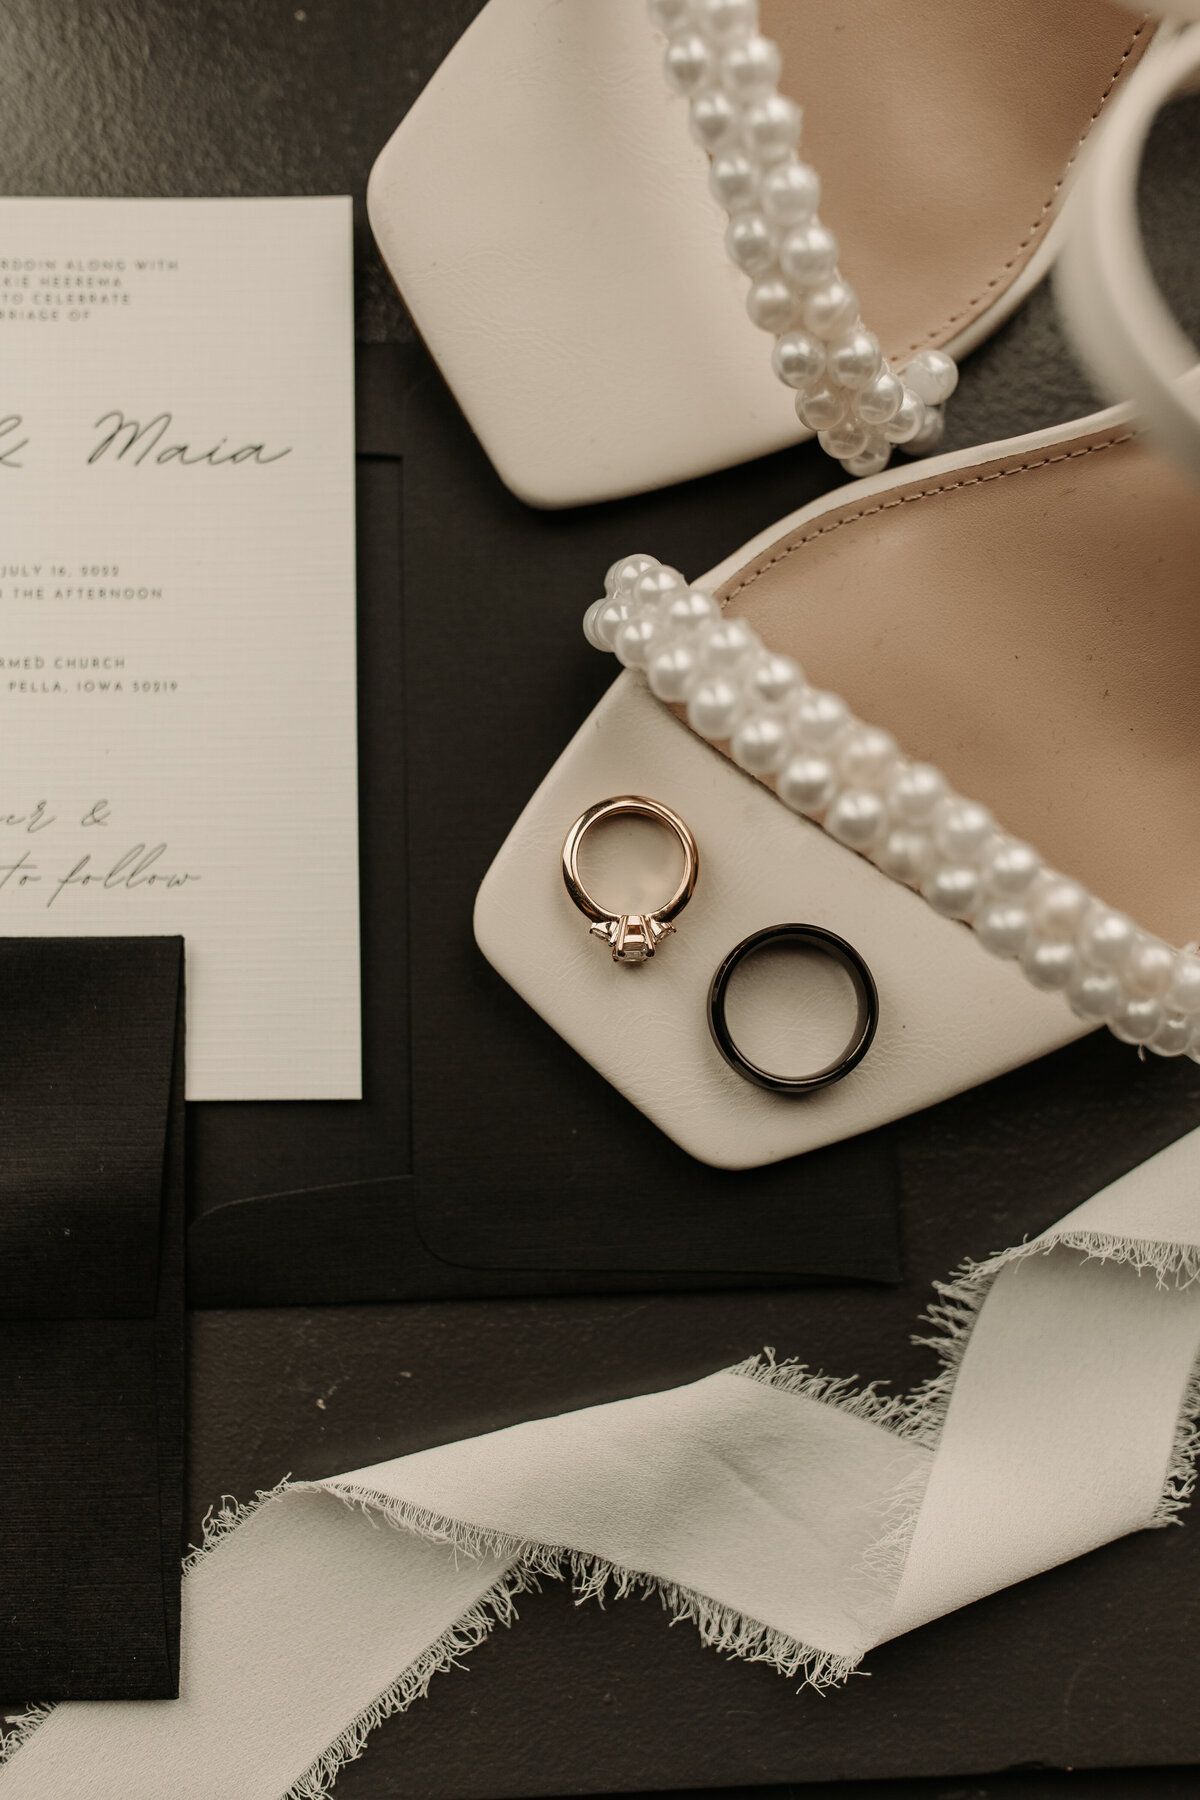 wedding rings, shows, and invitation